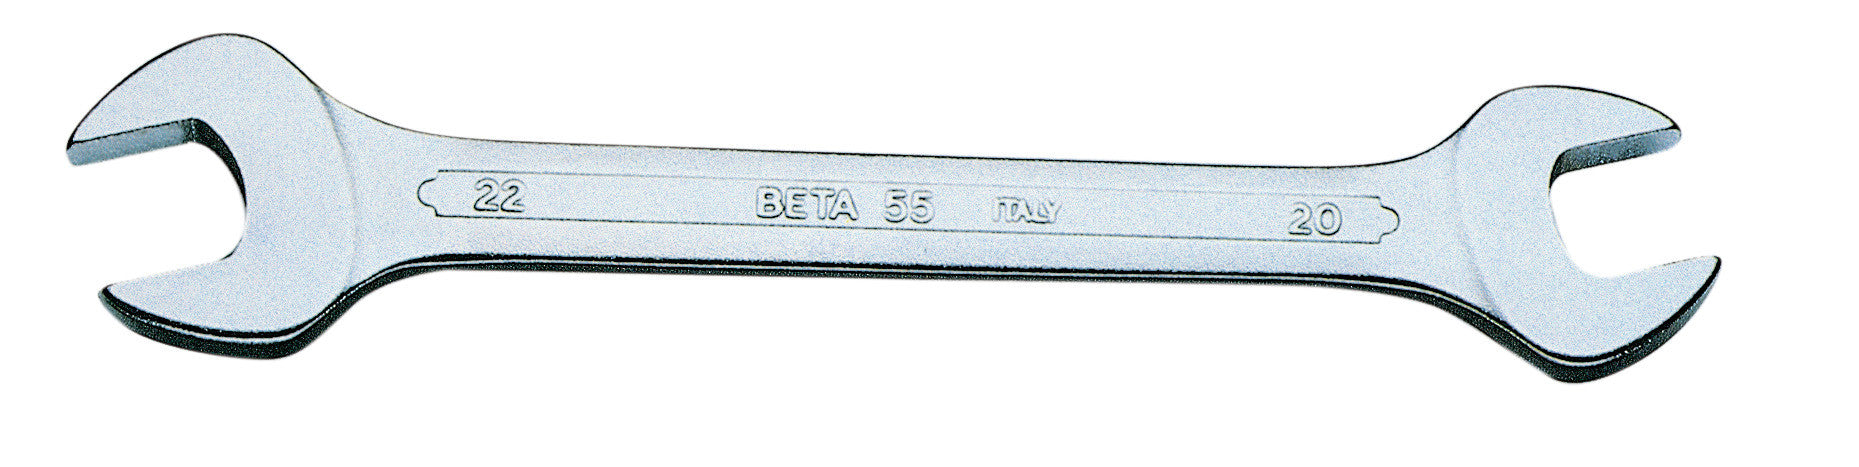 Beta art.  55 chiave a forc.doppia mm.34/36